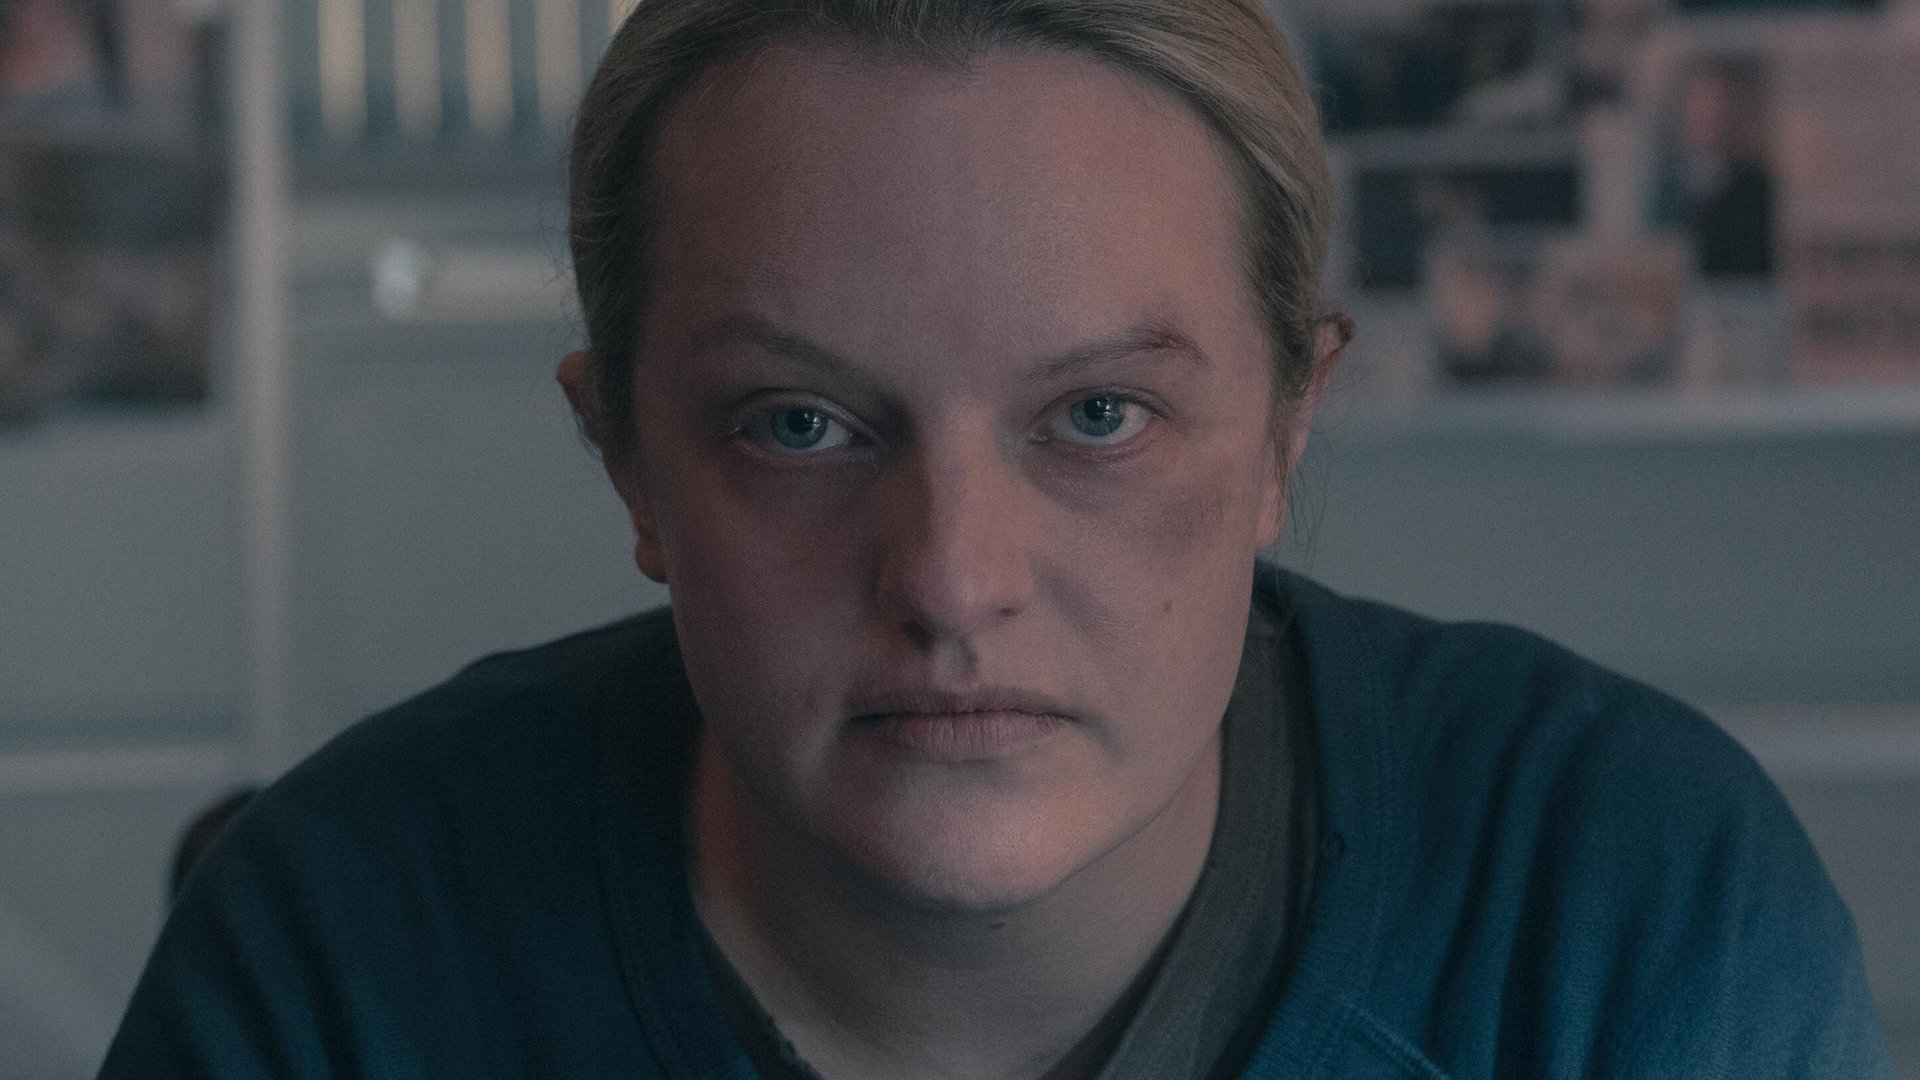 Close-up of Elisabeth Moss as June in ‘The Handmaid’s Tale’ Season 4 Episode 7, ‘Home’